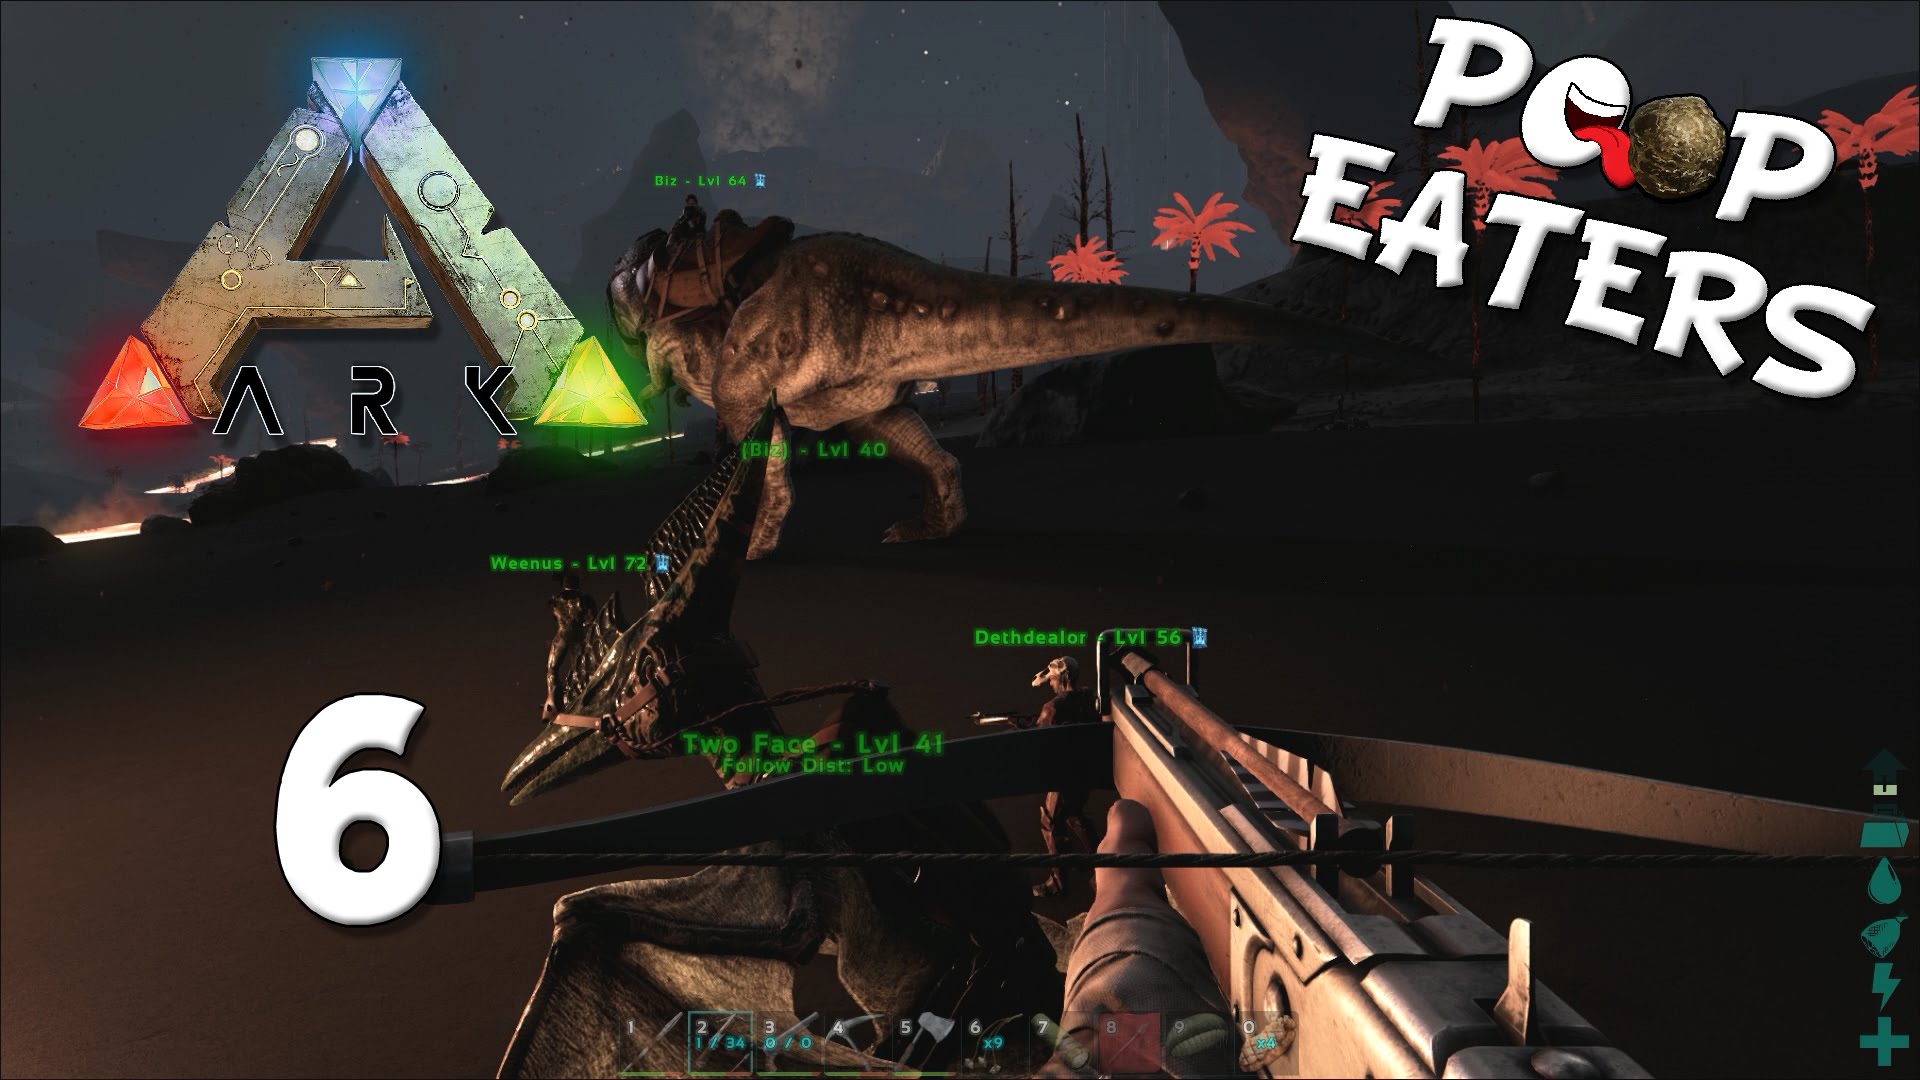 Let's Play Ark Survival Evolved Episode 5: The Poop Eaters 